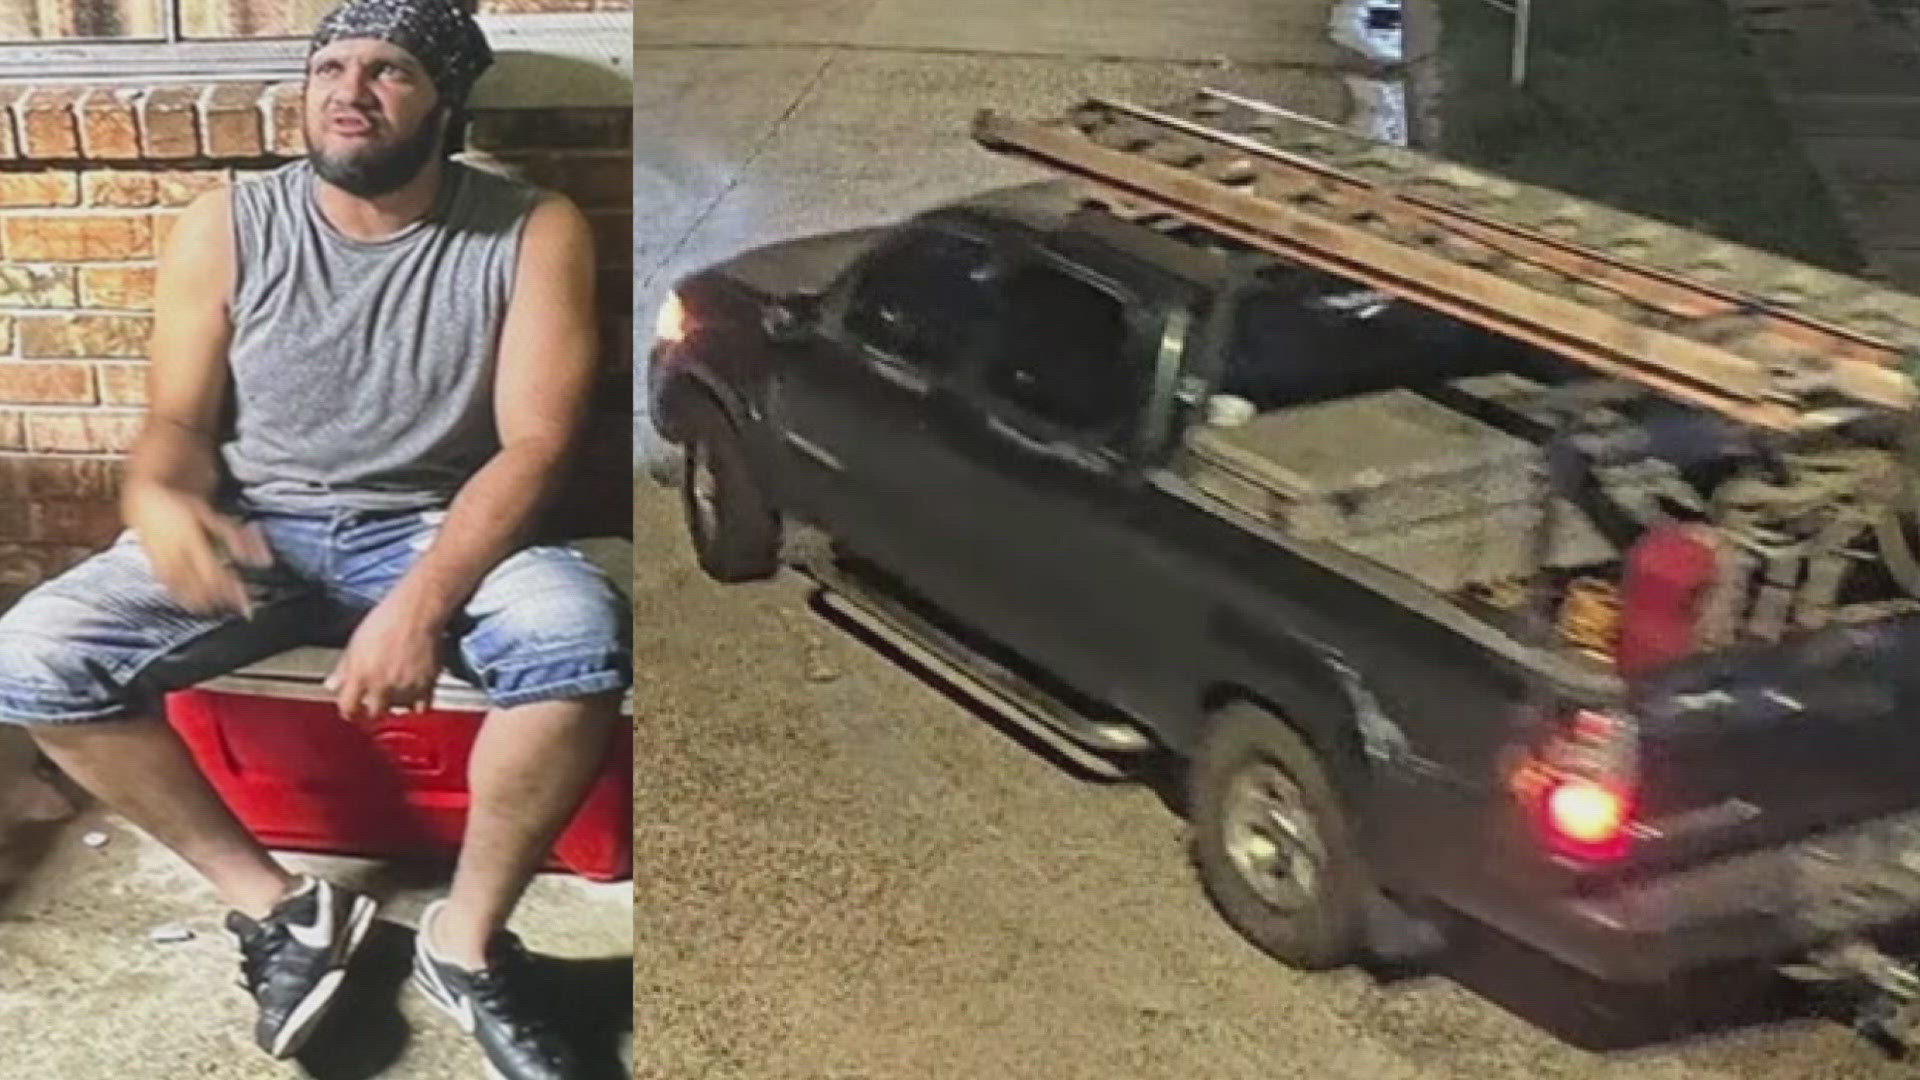 New Orleans Police Department released images of a suspect they believe shot two people in Michoud on Thursday.